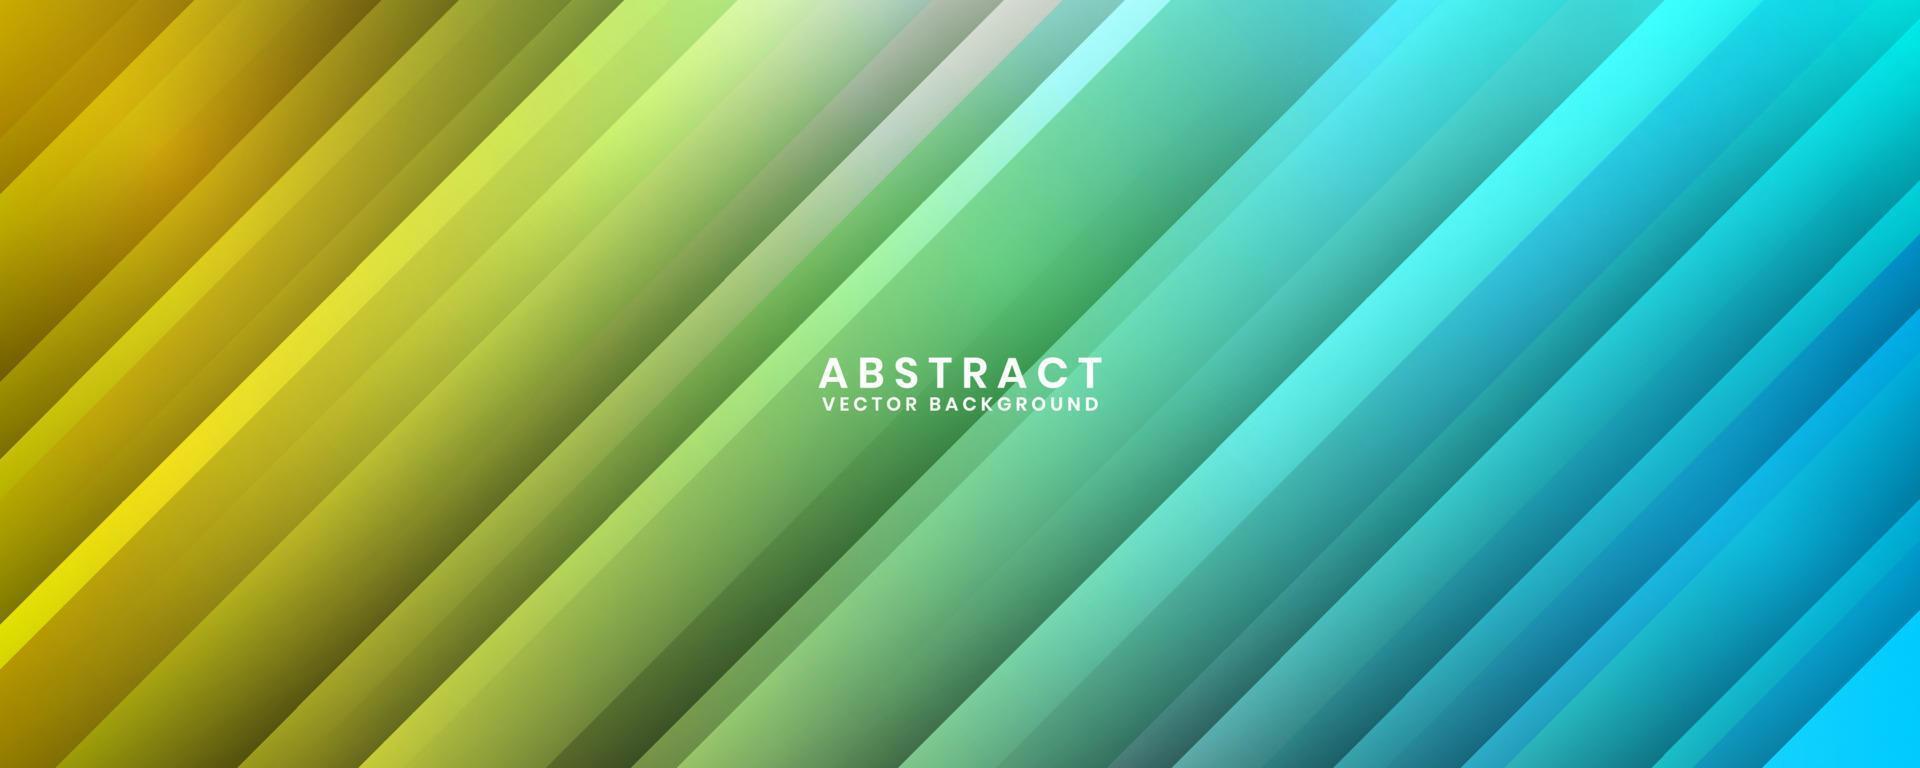 3D blue yellow geometric abstract background overlap layer on bright space with cutout decoration. Graphic design element colorful style concept for banner flyer, card, brochure cover, or landing page vector